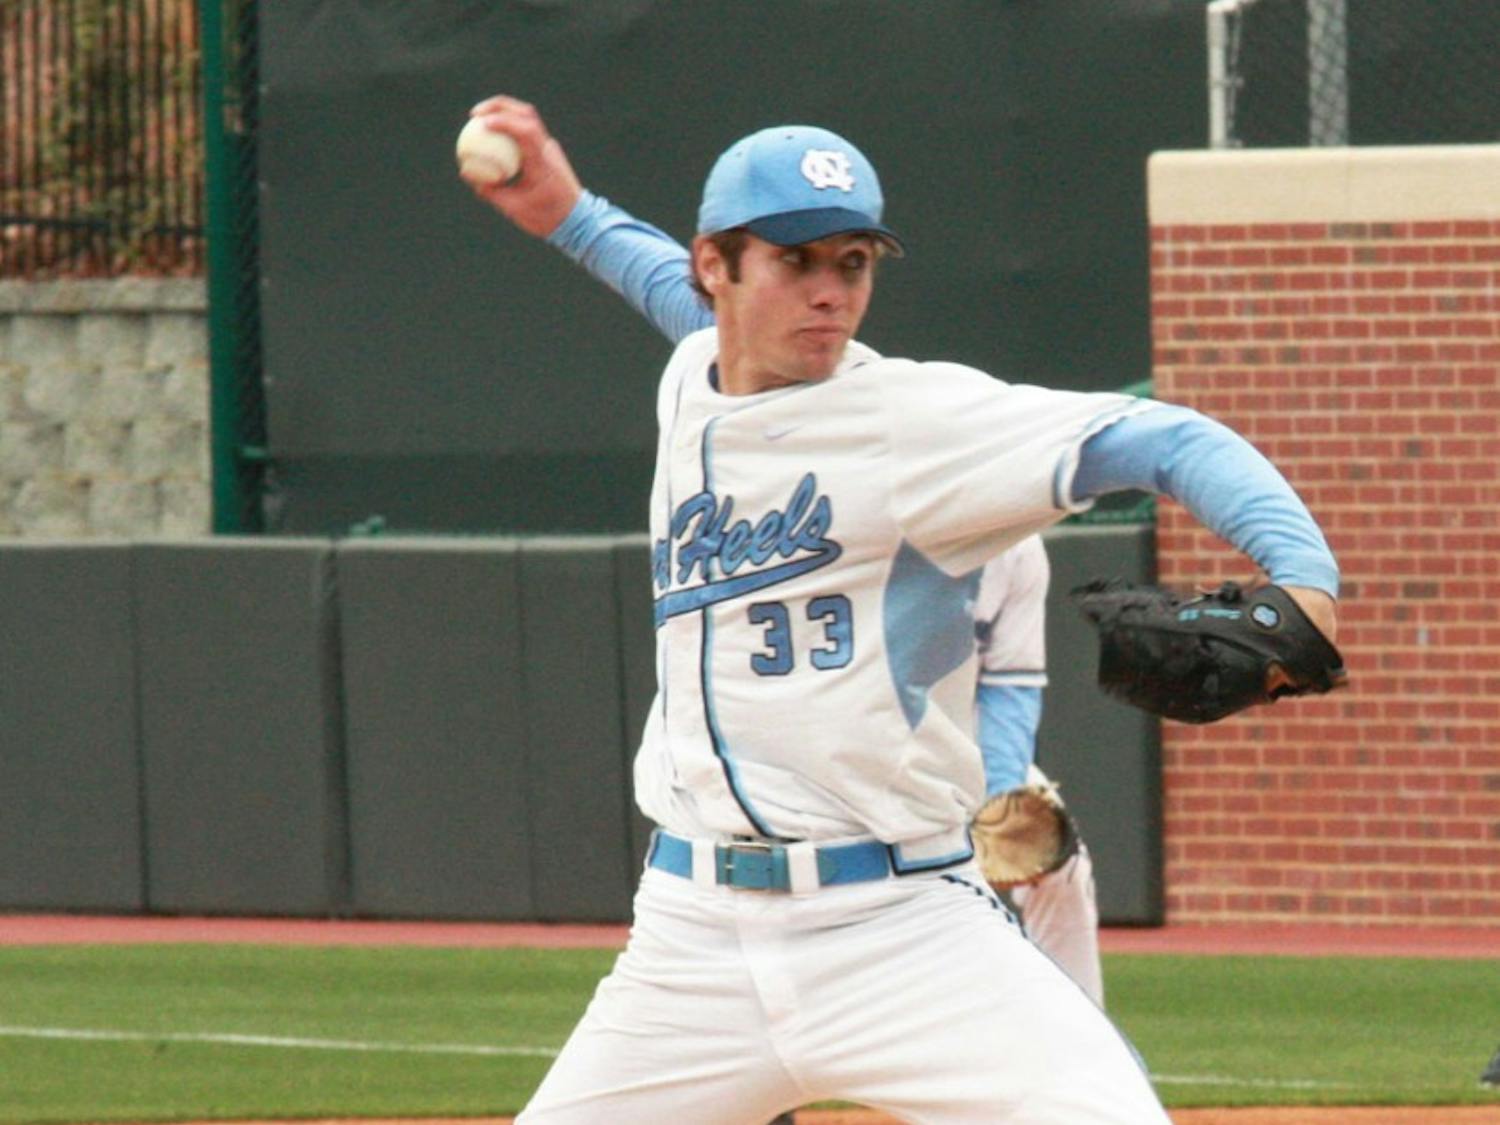 	Sophomore Cody Stiles continued his winning ways, picking up his third win on the mound this season for UNC. Stiles pitched 6 2/3 innings and allowed only five hits and one earned run with seven strikeouts.